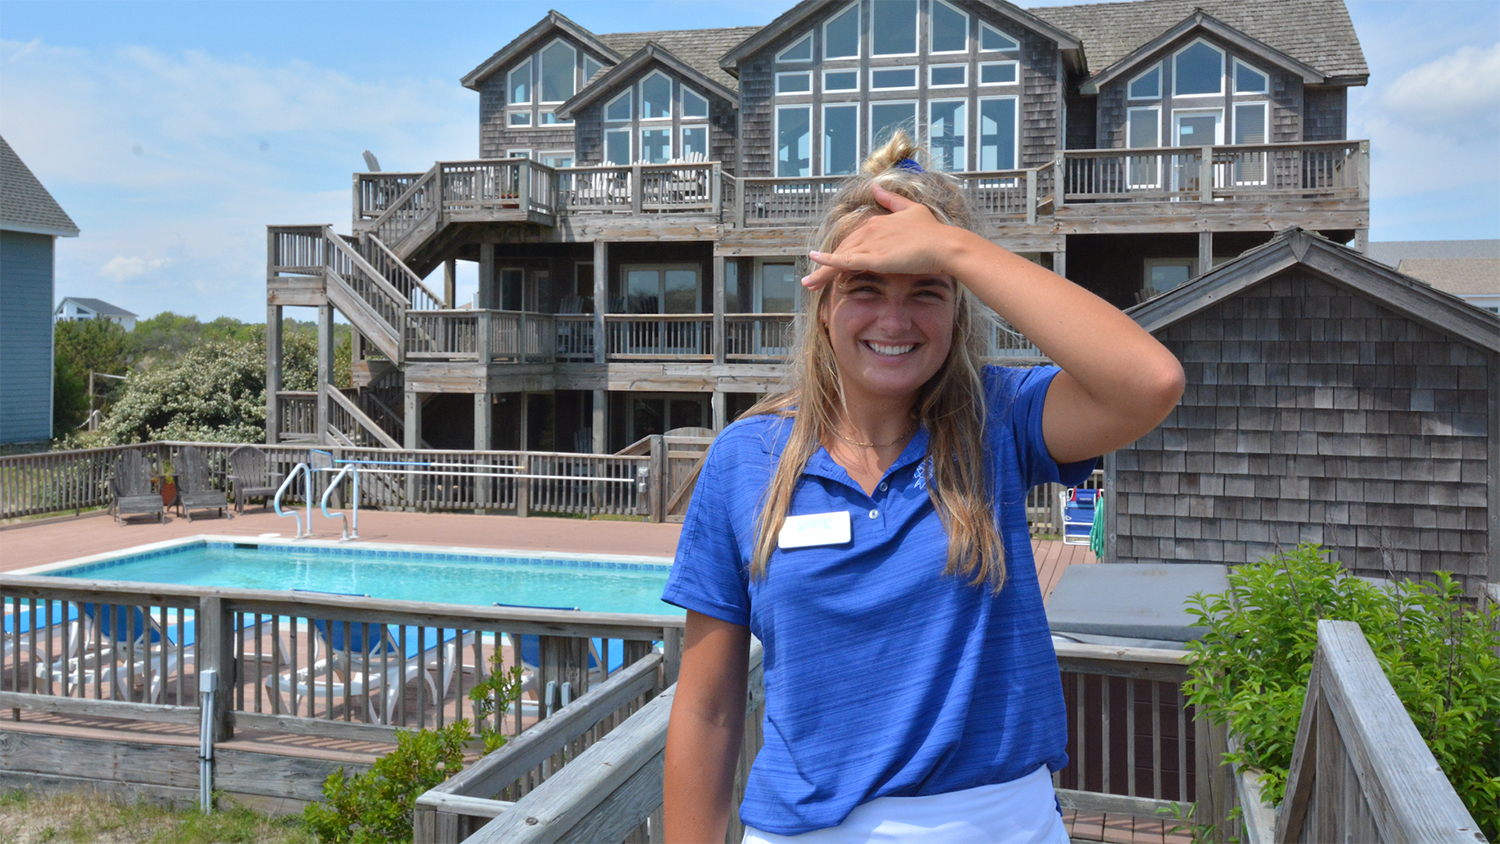 Micaela Nardino in front of a Twiddy and Company property - Twiddy Intern Micaela Nardino is Promoting Outer Banks Tourism - Parks Recreation and Tourism Management